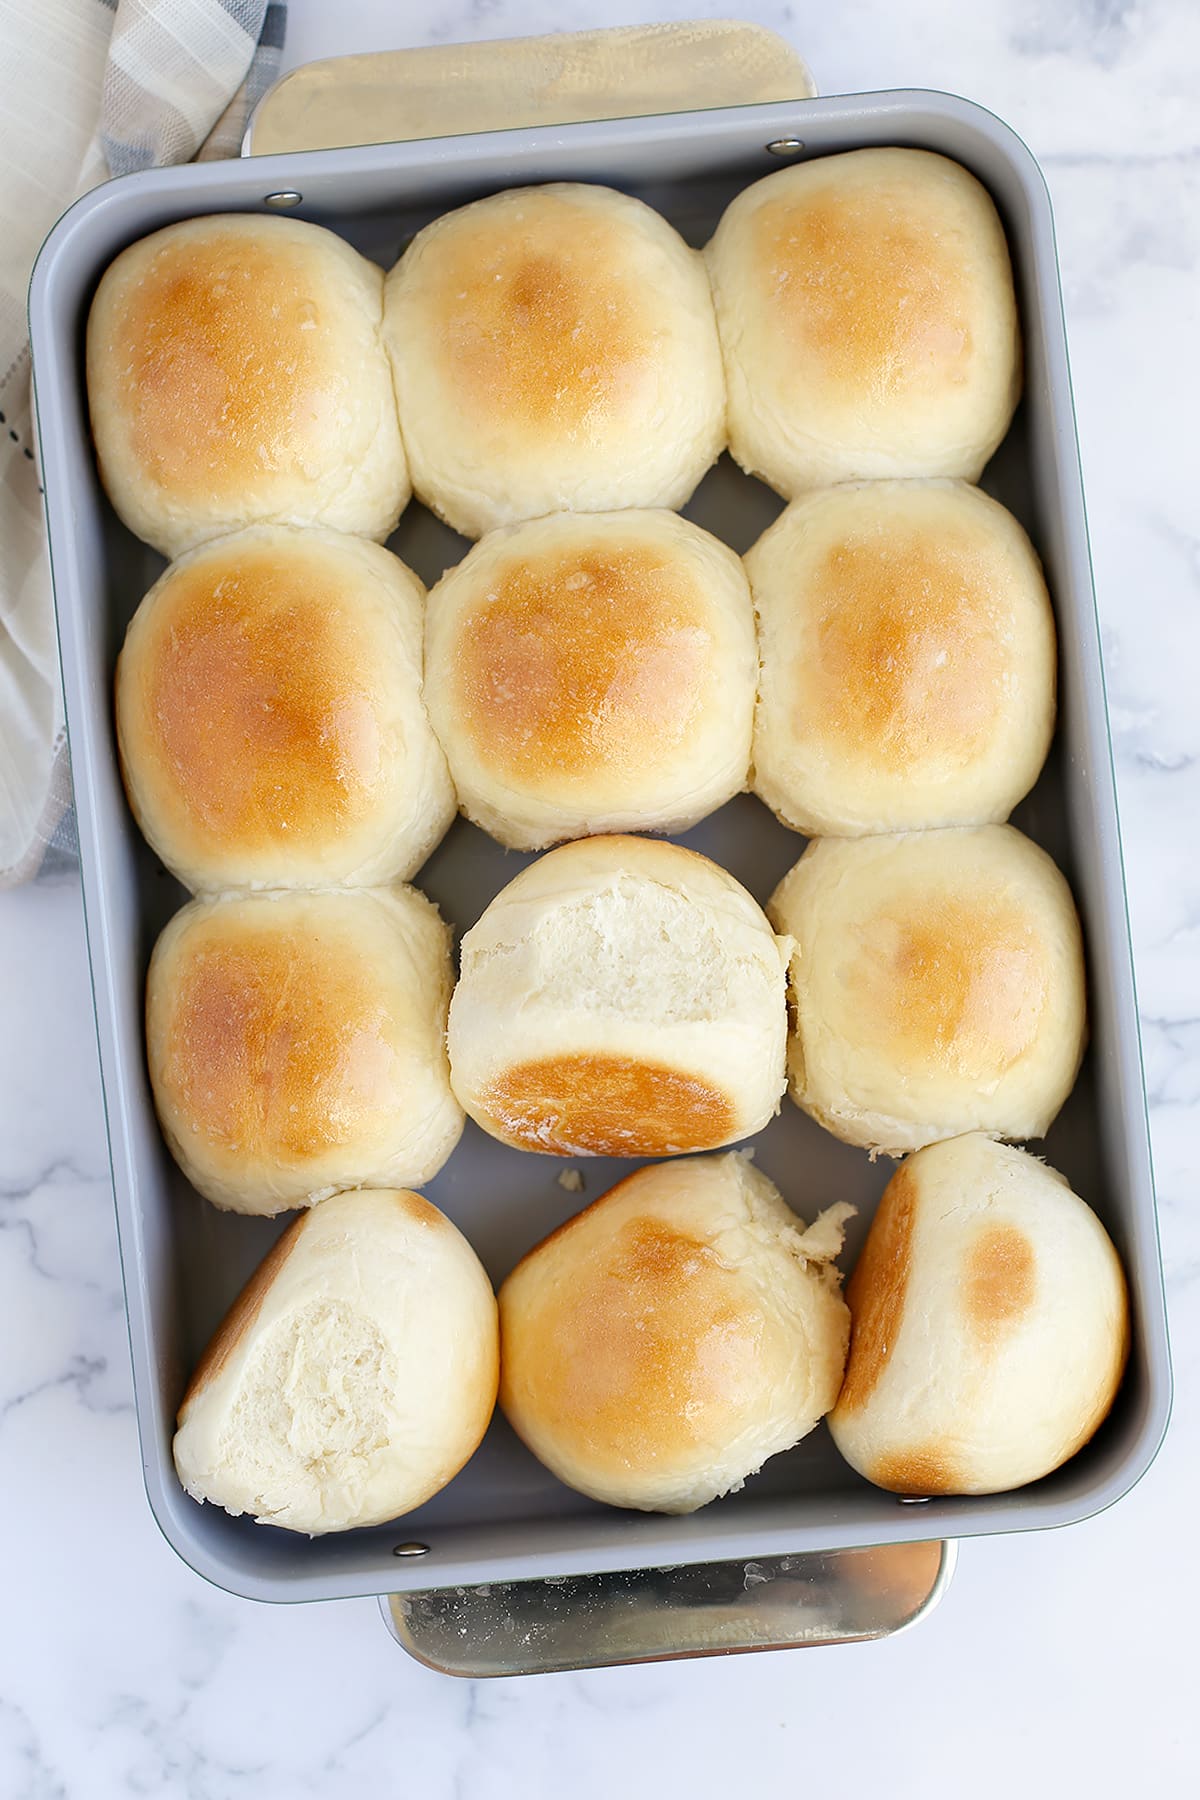 Light and fluffy homemade rolls in a gray baking dish.